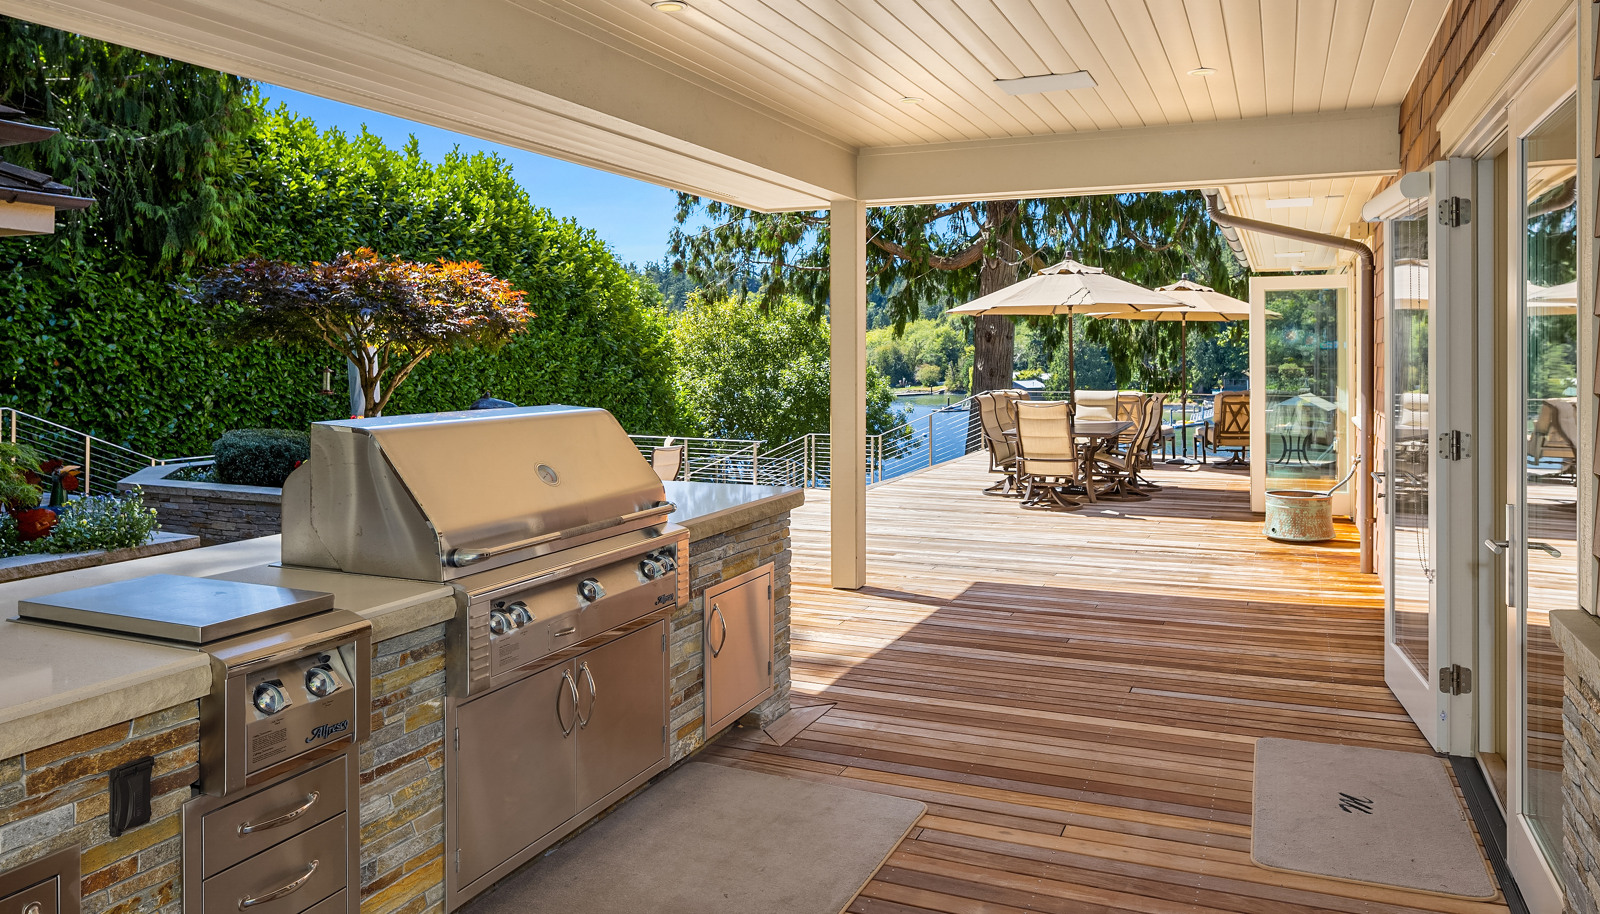 The well appointed, covered (with shiplap ceiling) outdoor kitchen with bbq, warmers and a grill. 